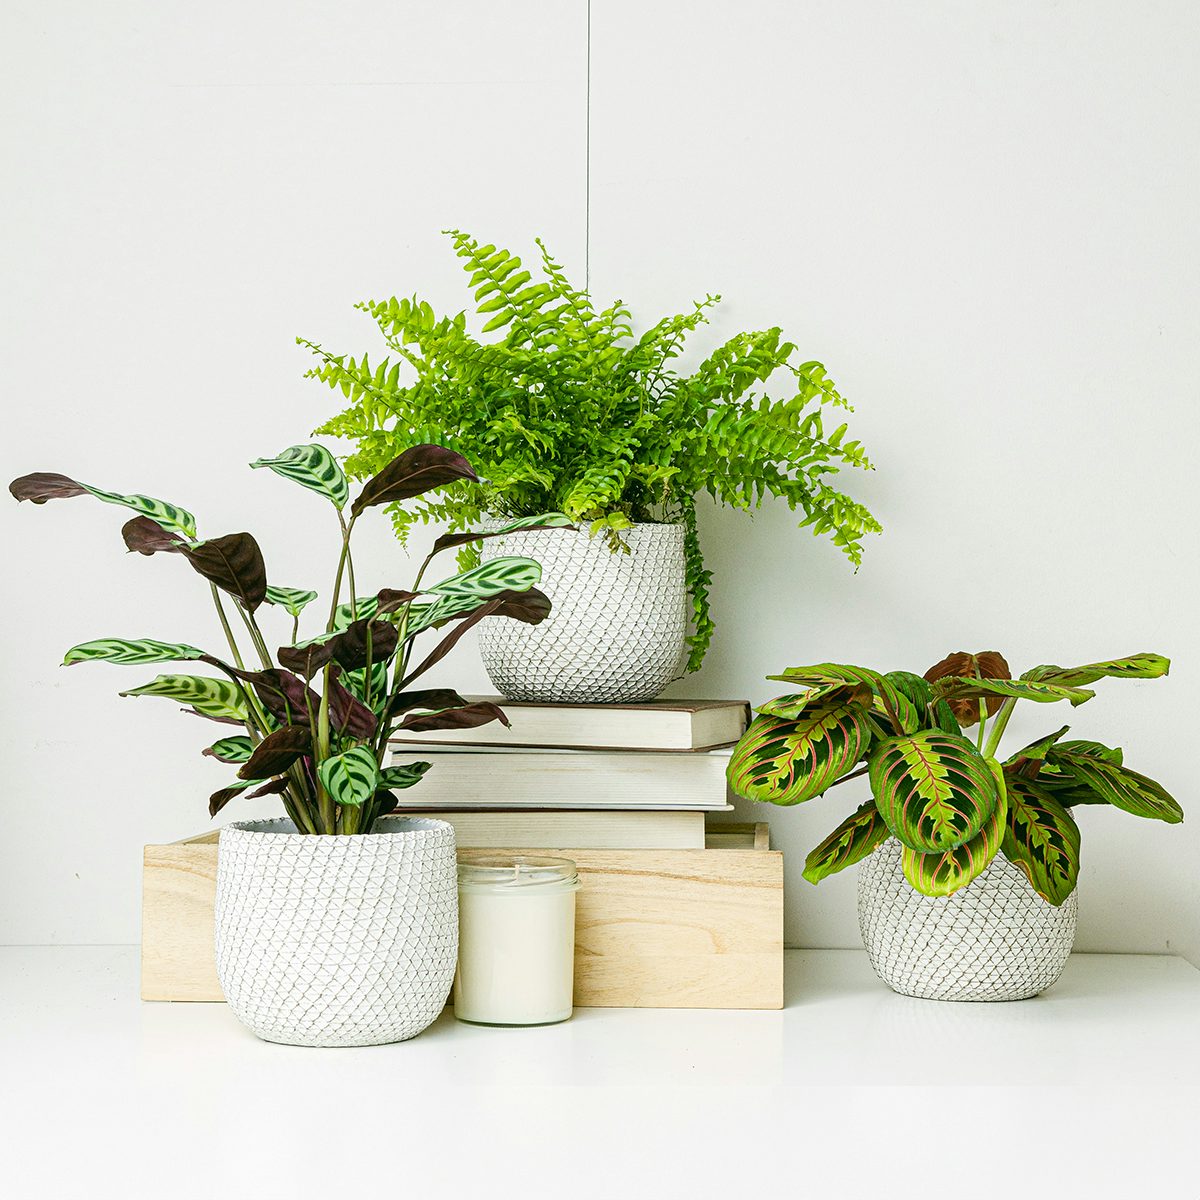 Plant Trio: Homes with Pets